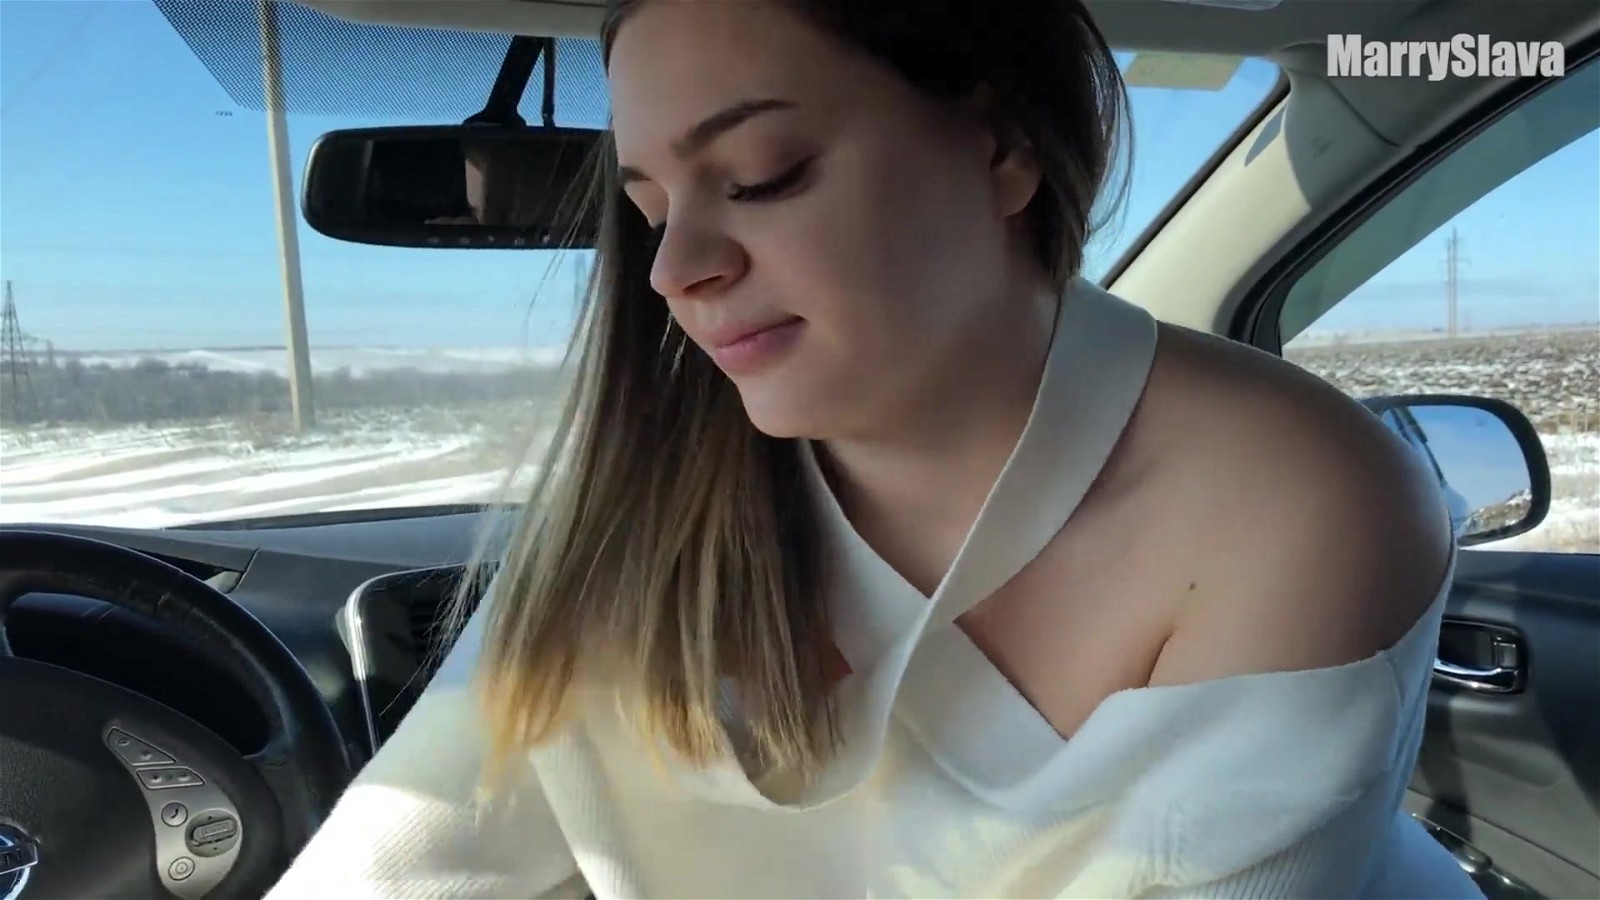 Russian girl sucking dick and getting fucked in the car » PornoReino